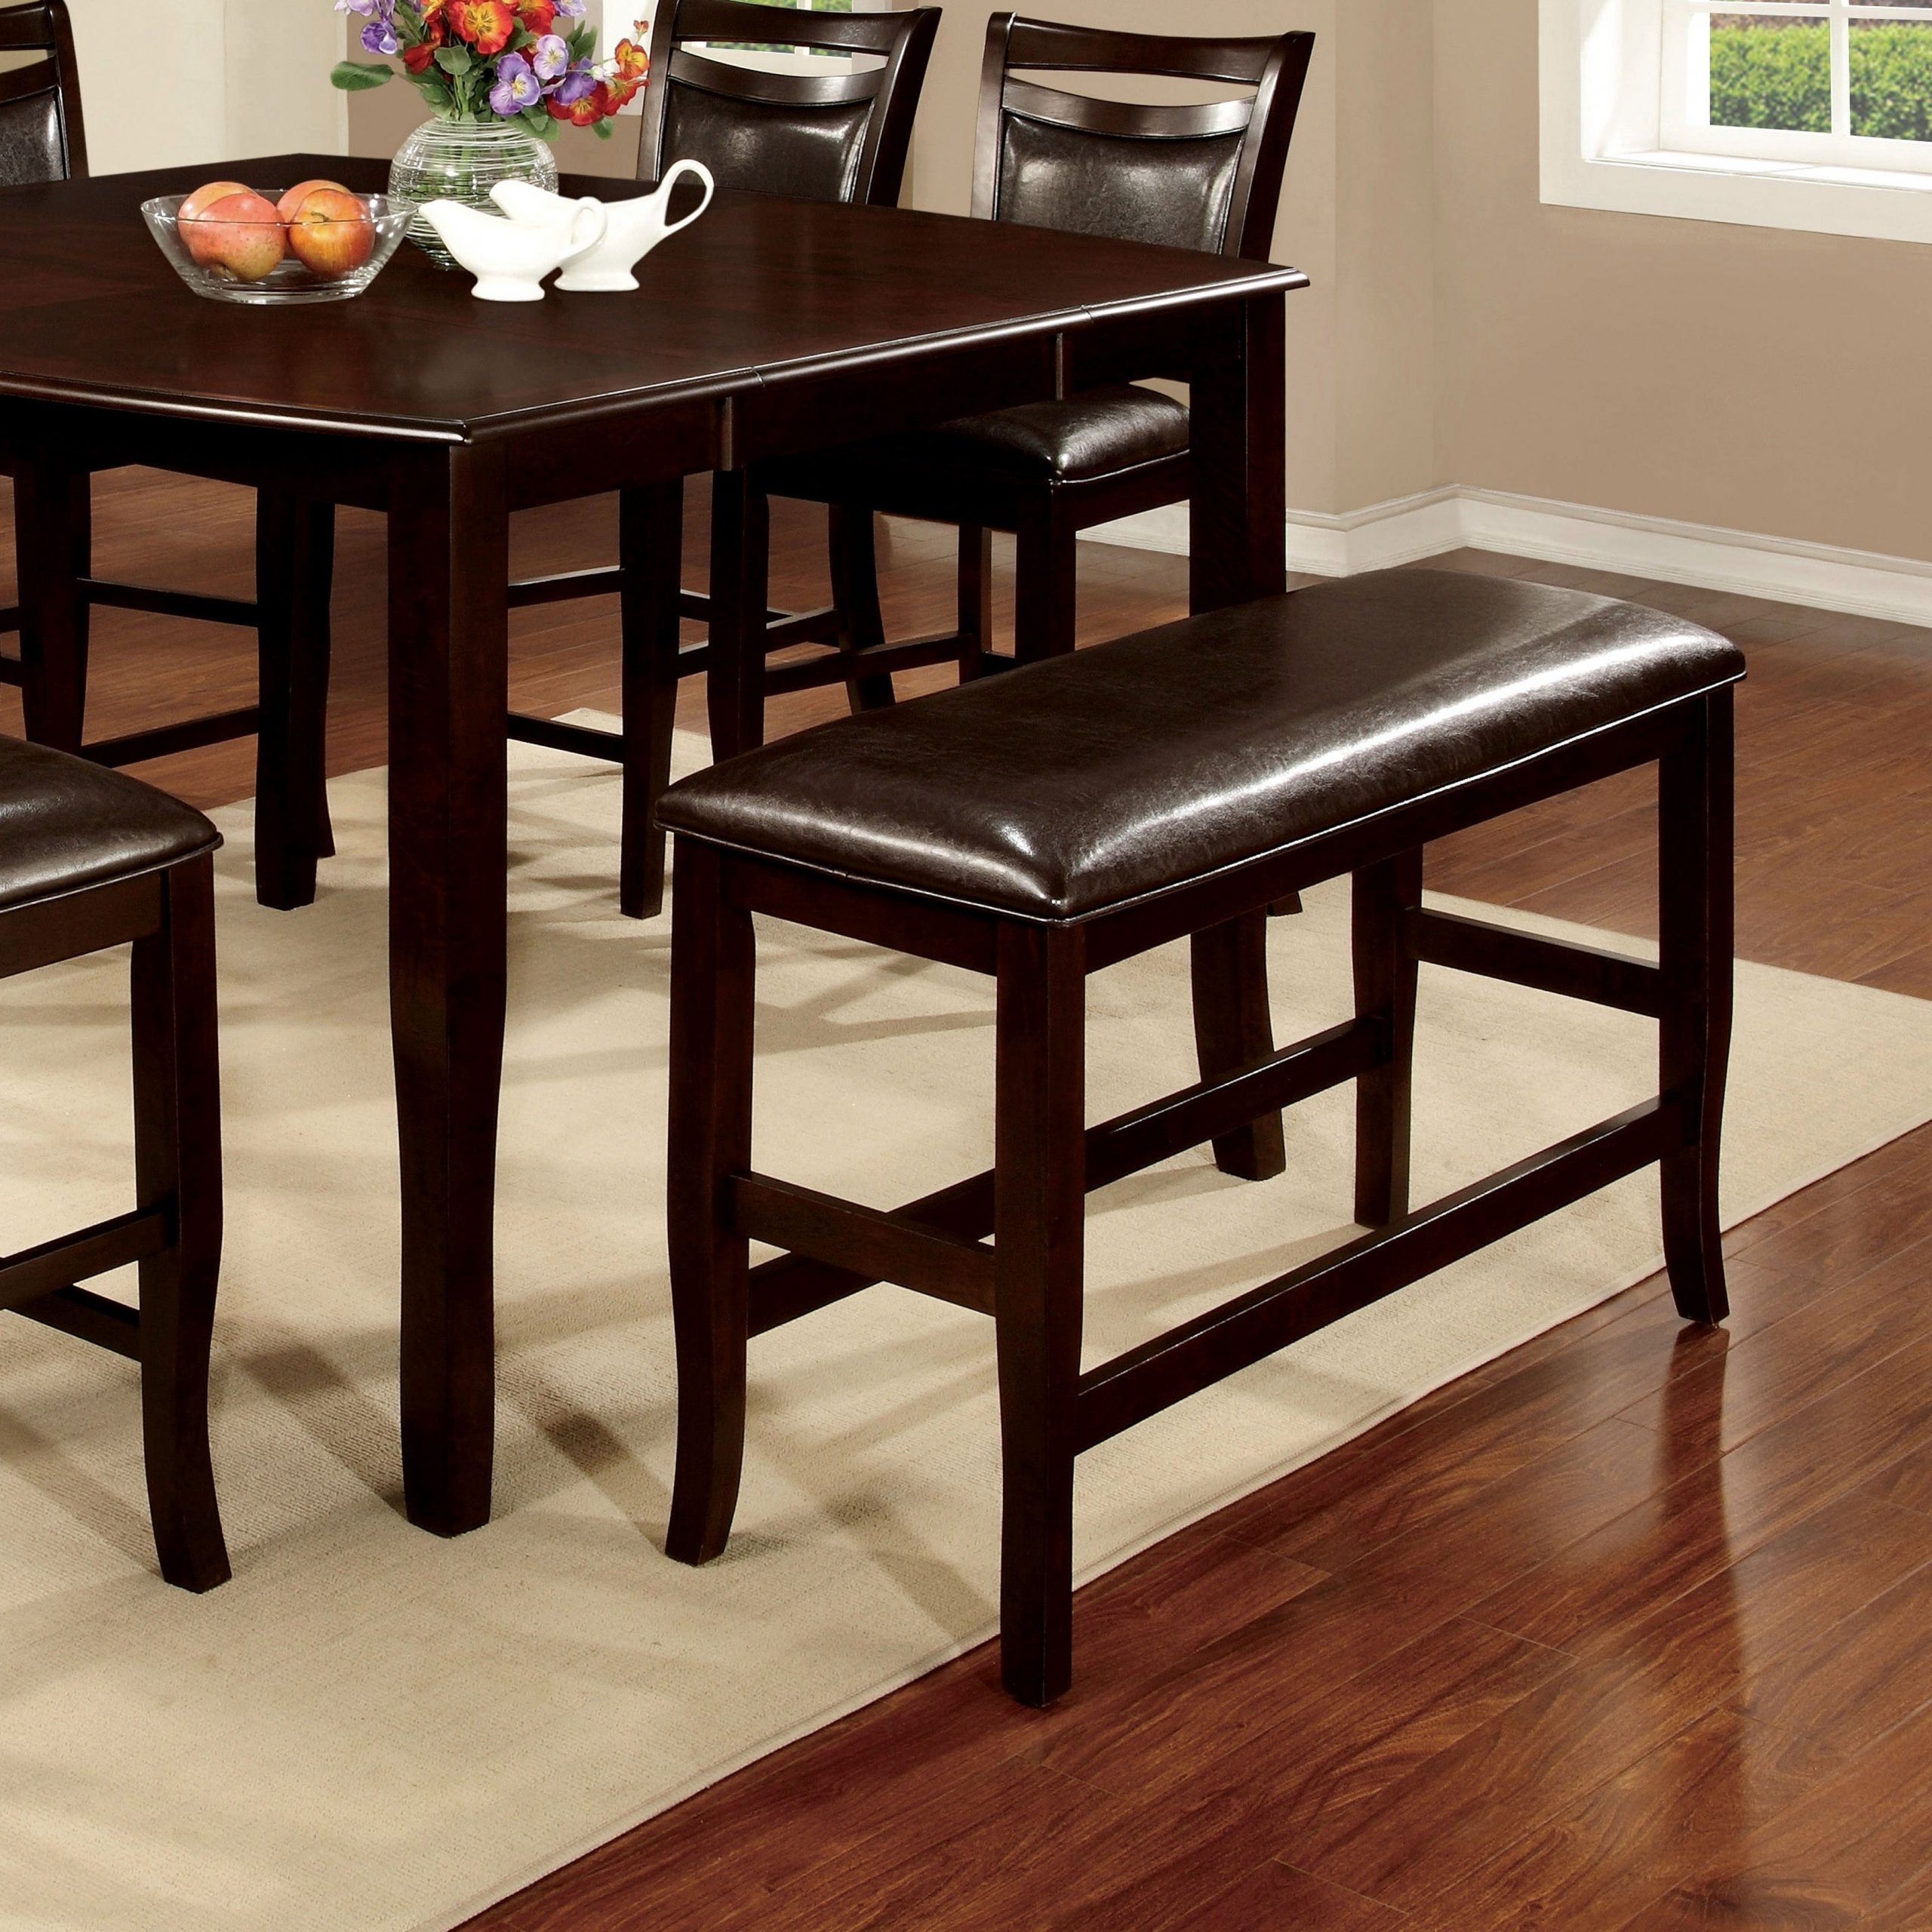 Counter Height Dining Room Table Chairs • Faucet Ideas Site High Dining Room Tables